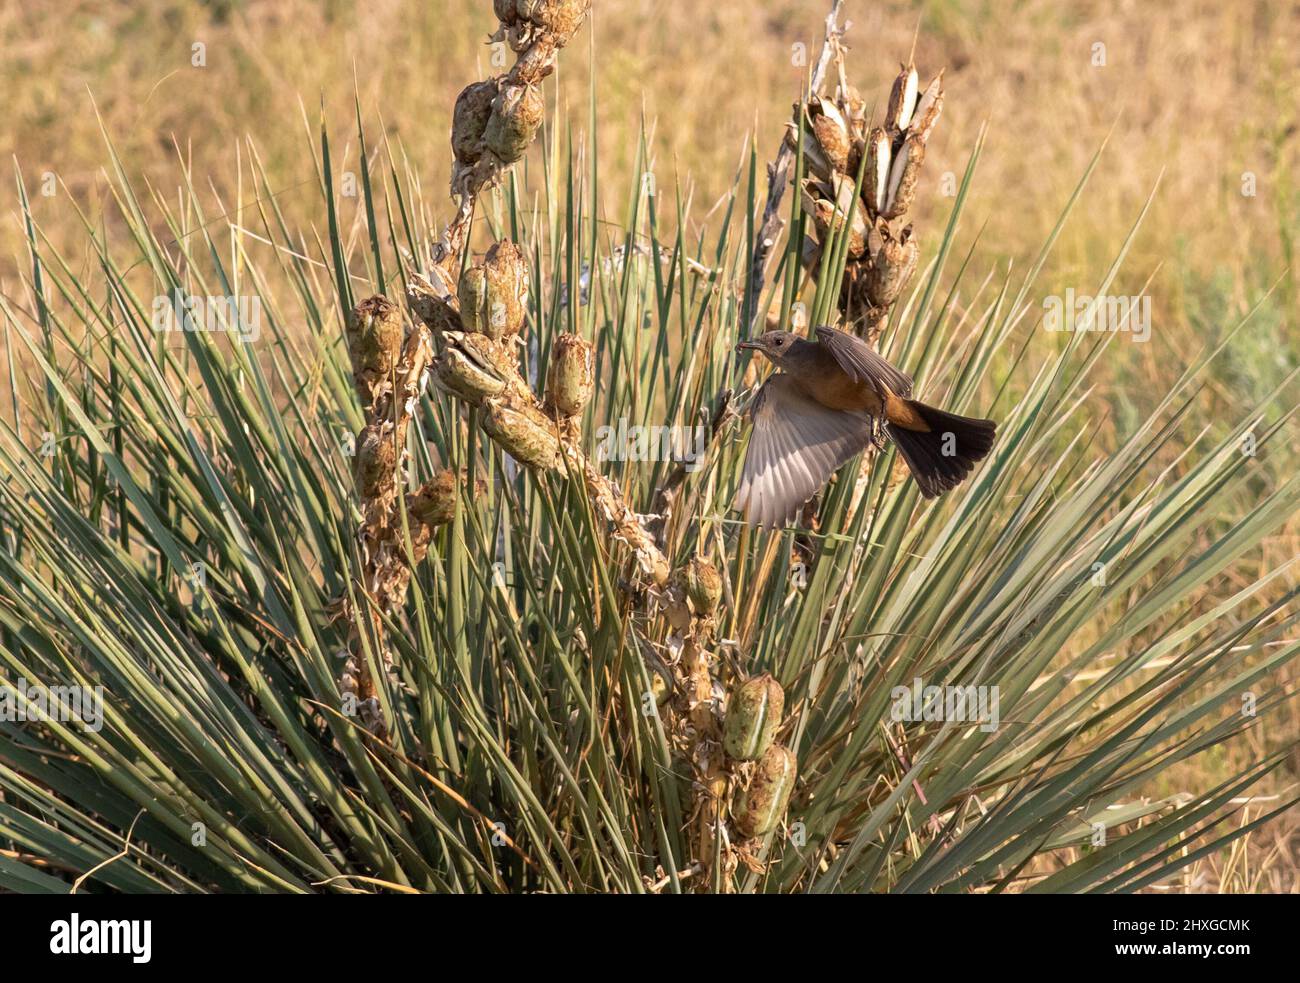 Close up of a Say's Phoebe in flight, hovering over a Yucca plant with a caught insect in its beak. Stock Photo